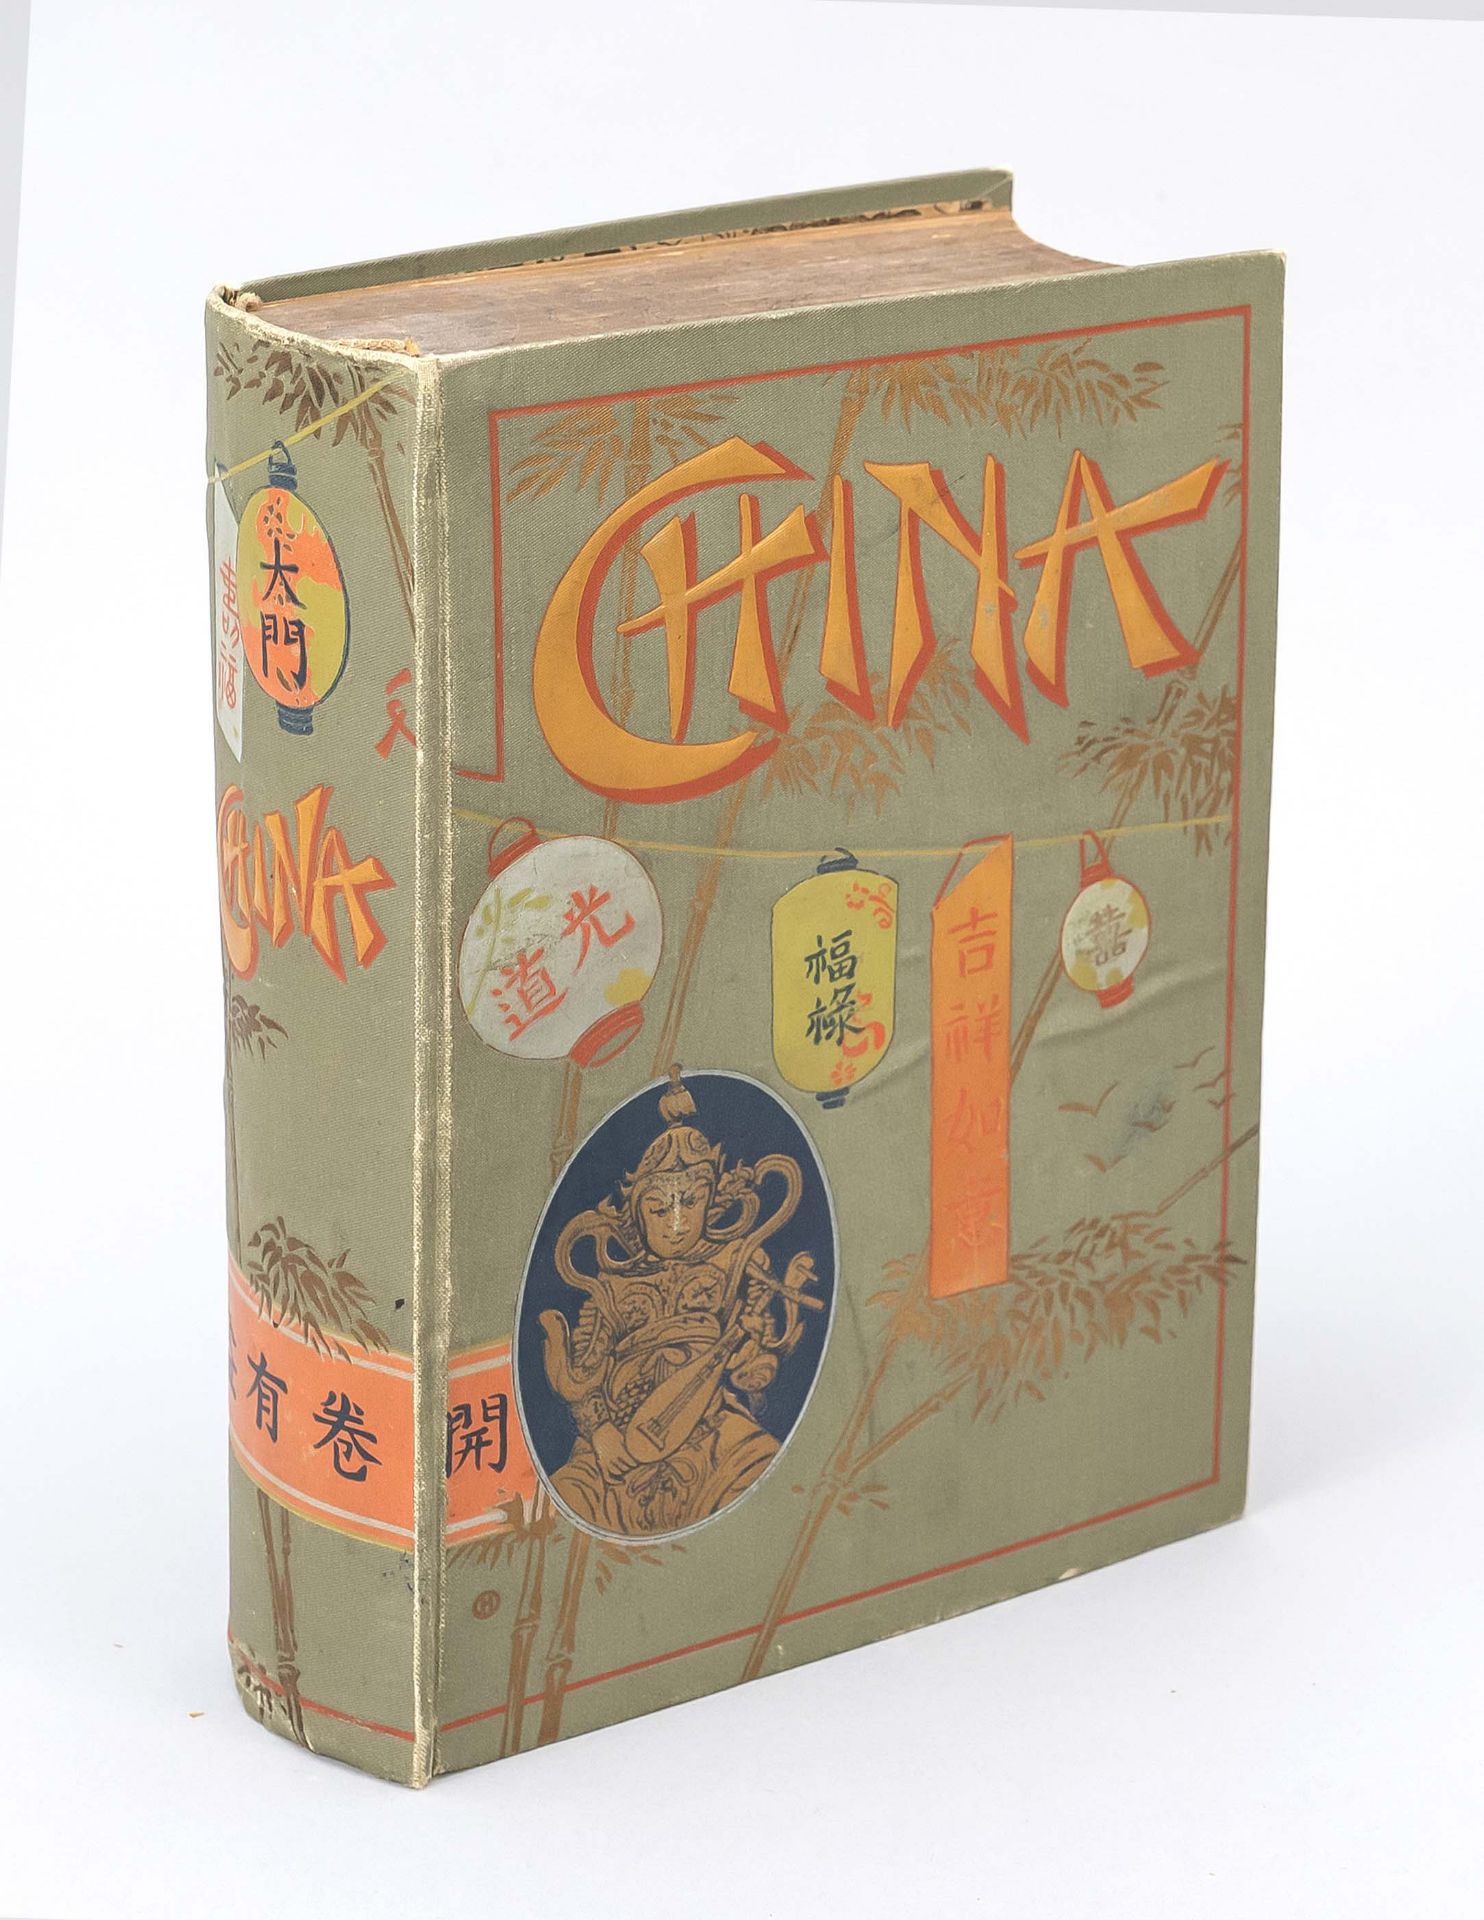 Book ''China - Land and People - illustrated history of the empire and its turmoil'' by Dr. Emil